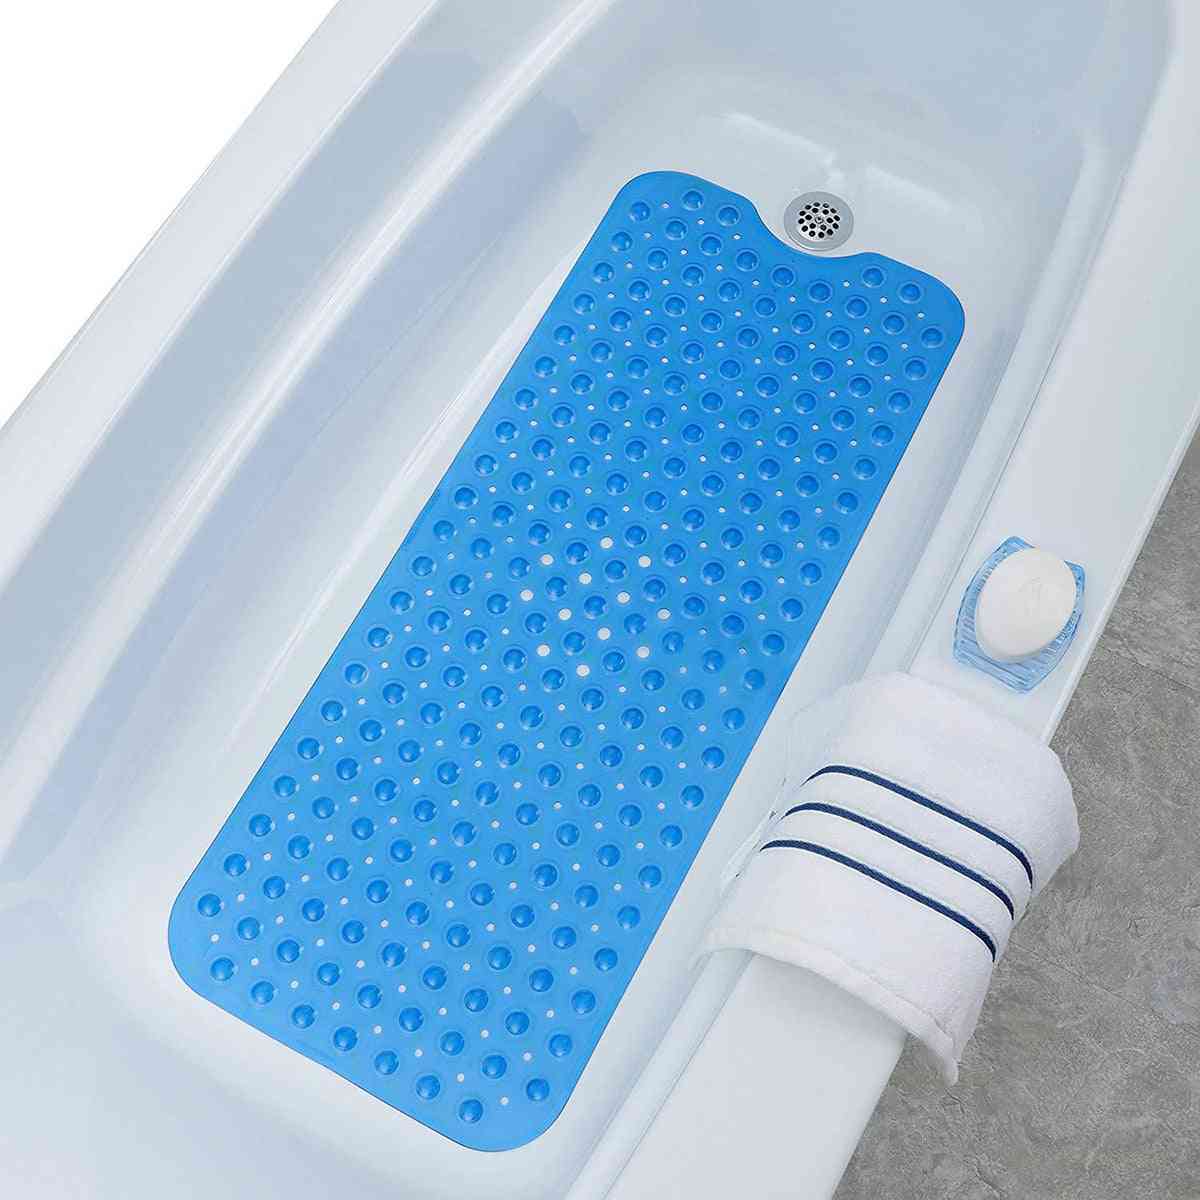 Pvc Large Safety Shower Non-slip Bath Mats With Suction Cups